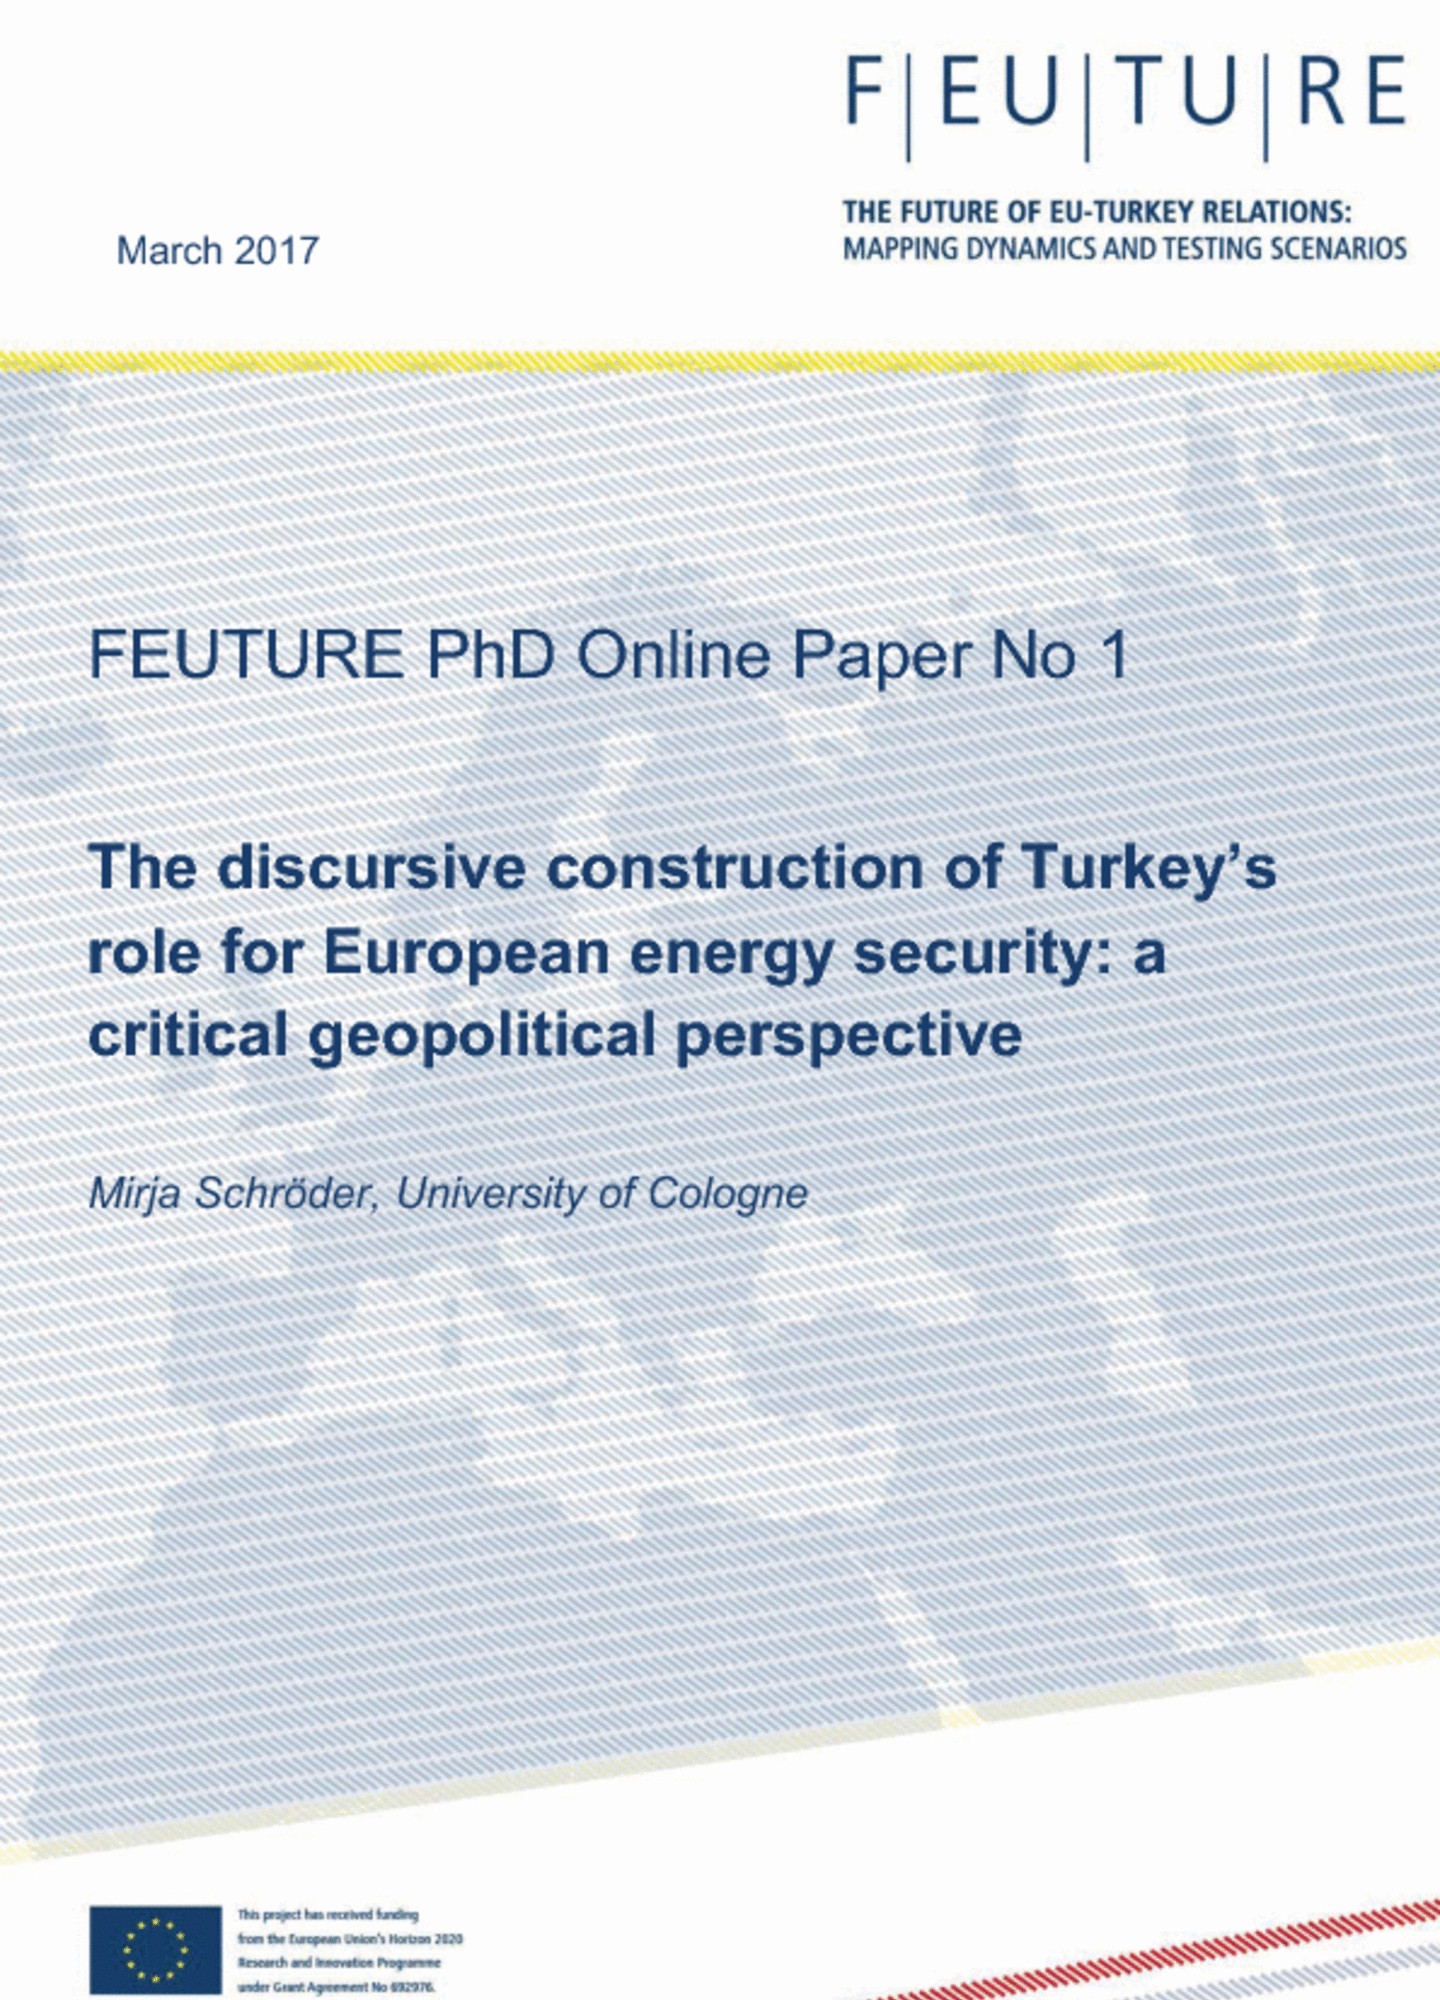 The discursive construction of Turkey’s role for European energy security: a critical geopolitical perspective